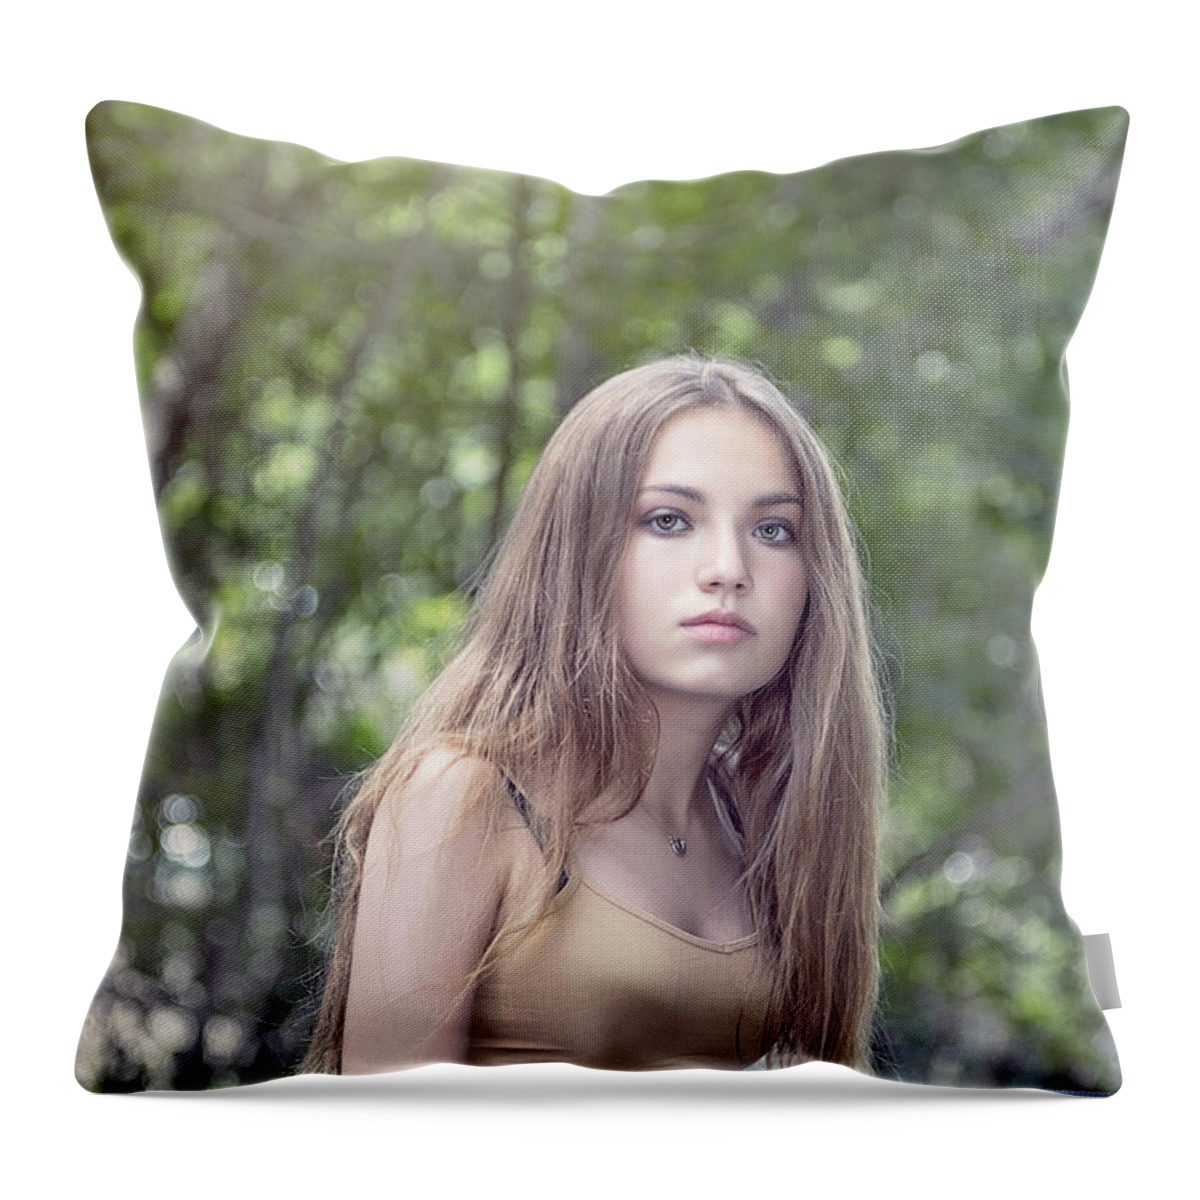 Girl Throw Pillow featuring the photograph Sunkissed by Evelina Kremsdorf